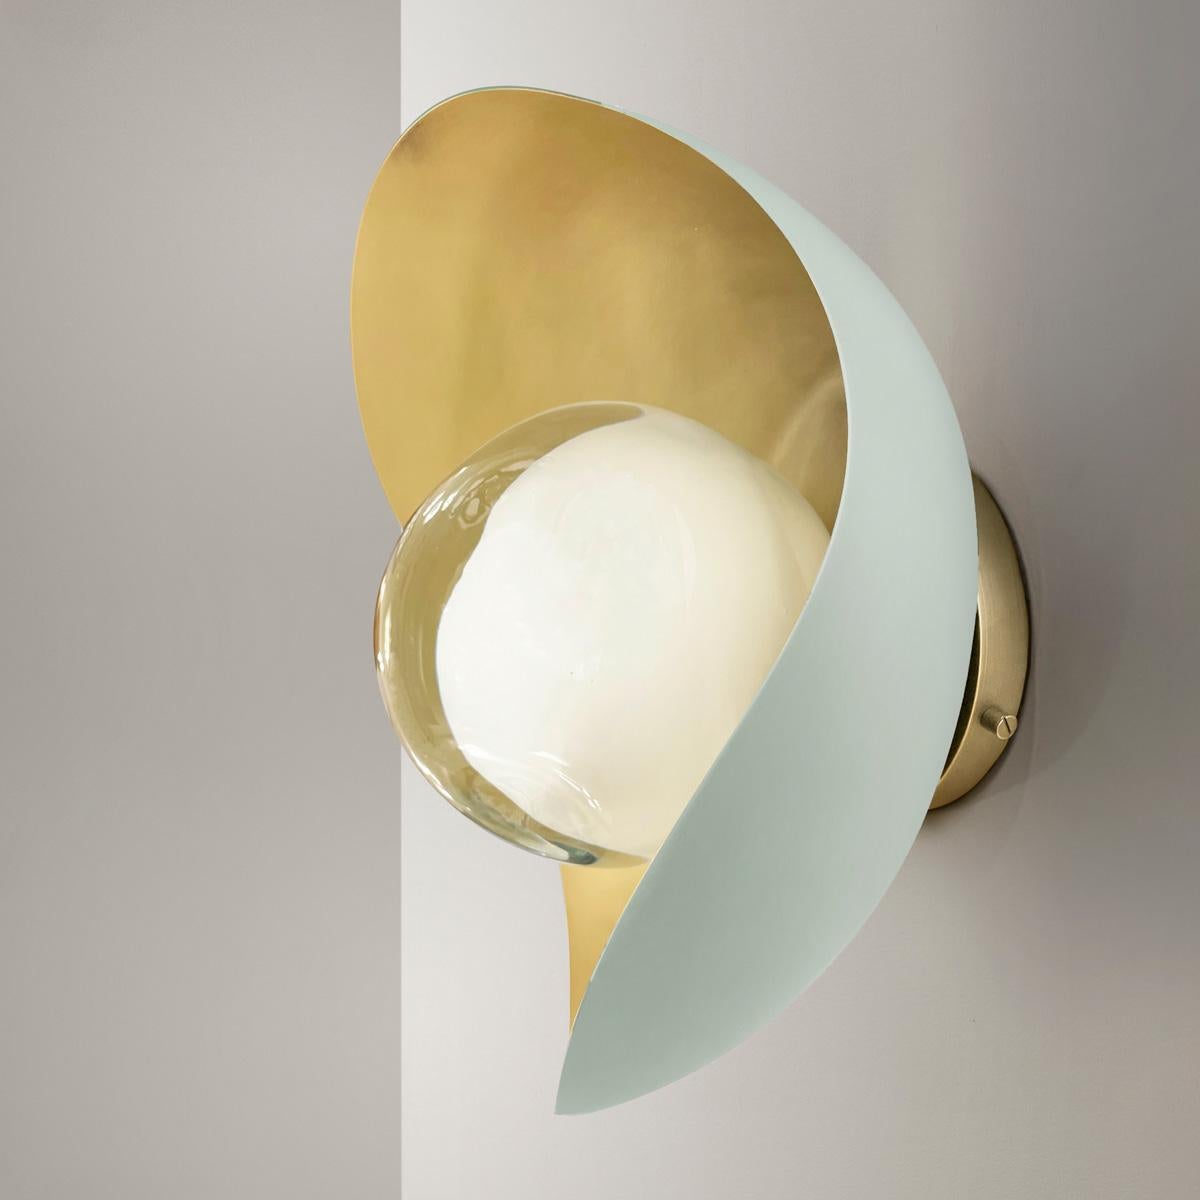 Perla Wall Light by Gaspare Asaro-Satin Brass/Polished Nickel Finish For Sale 3